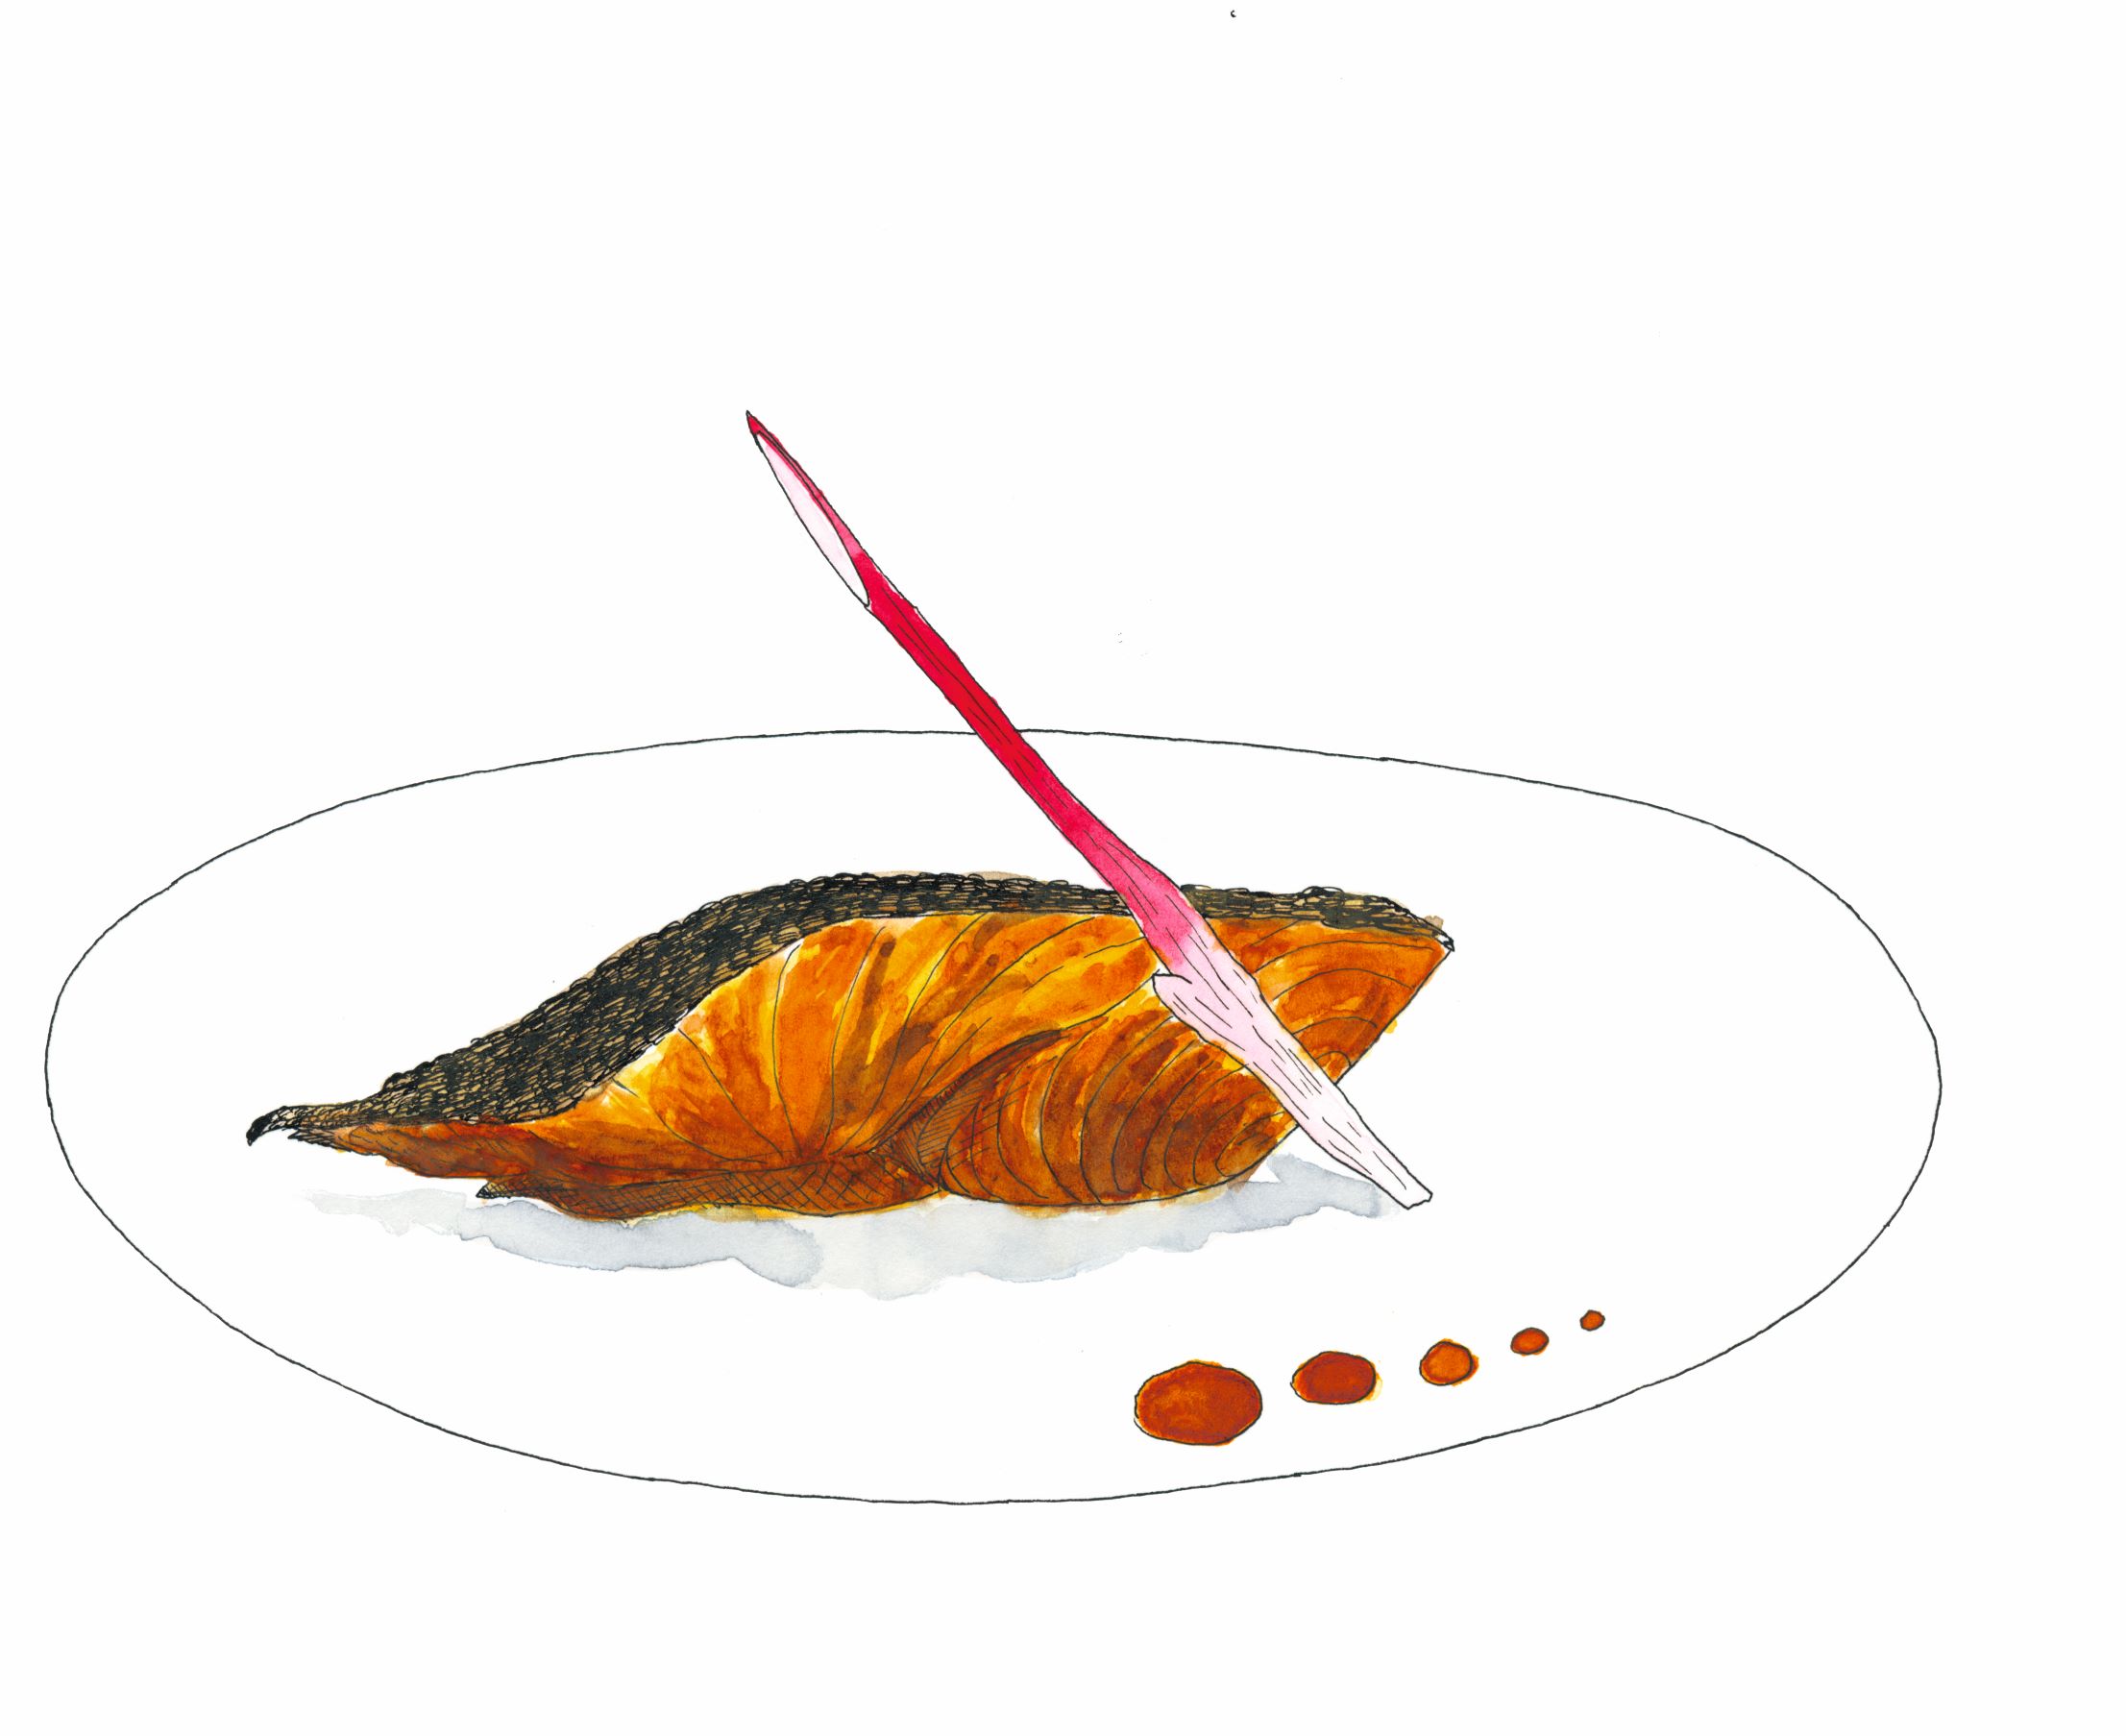 Black Cod with Miso by Nobu Matsuhisa, Matsuhisa, United States c.1987. As reproduced in Signature Dishes That Matter